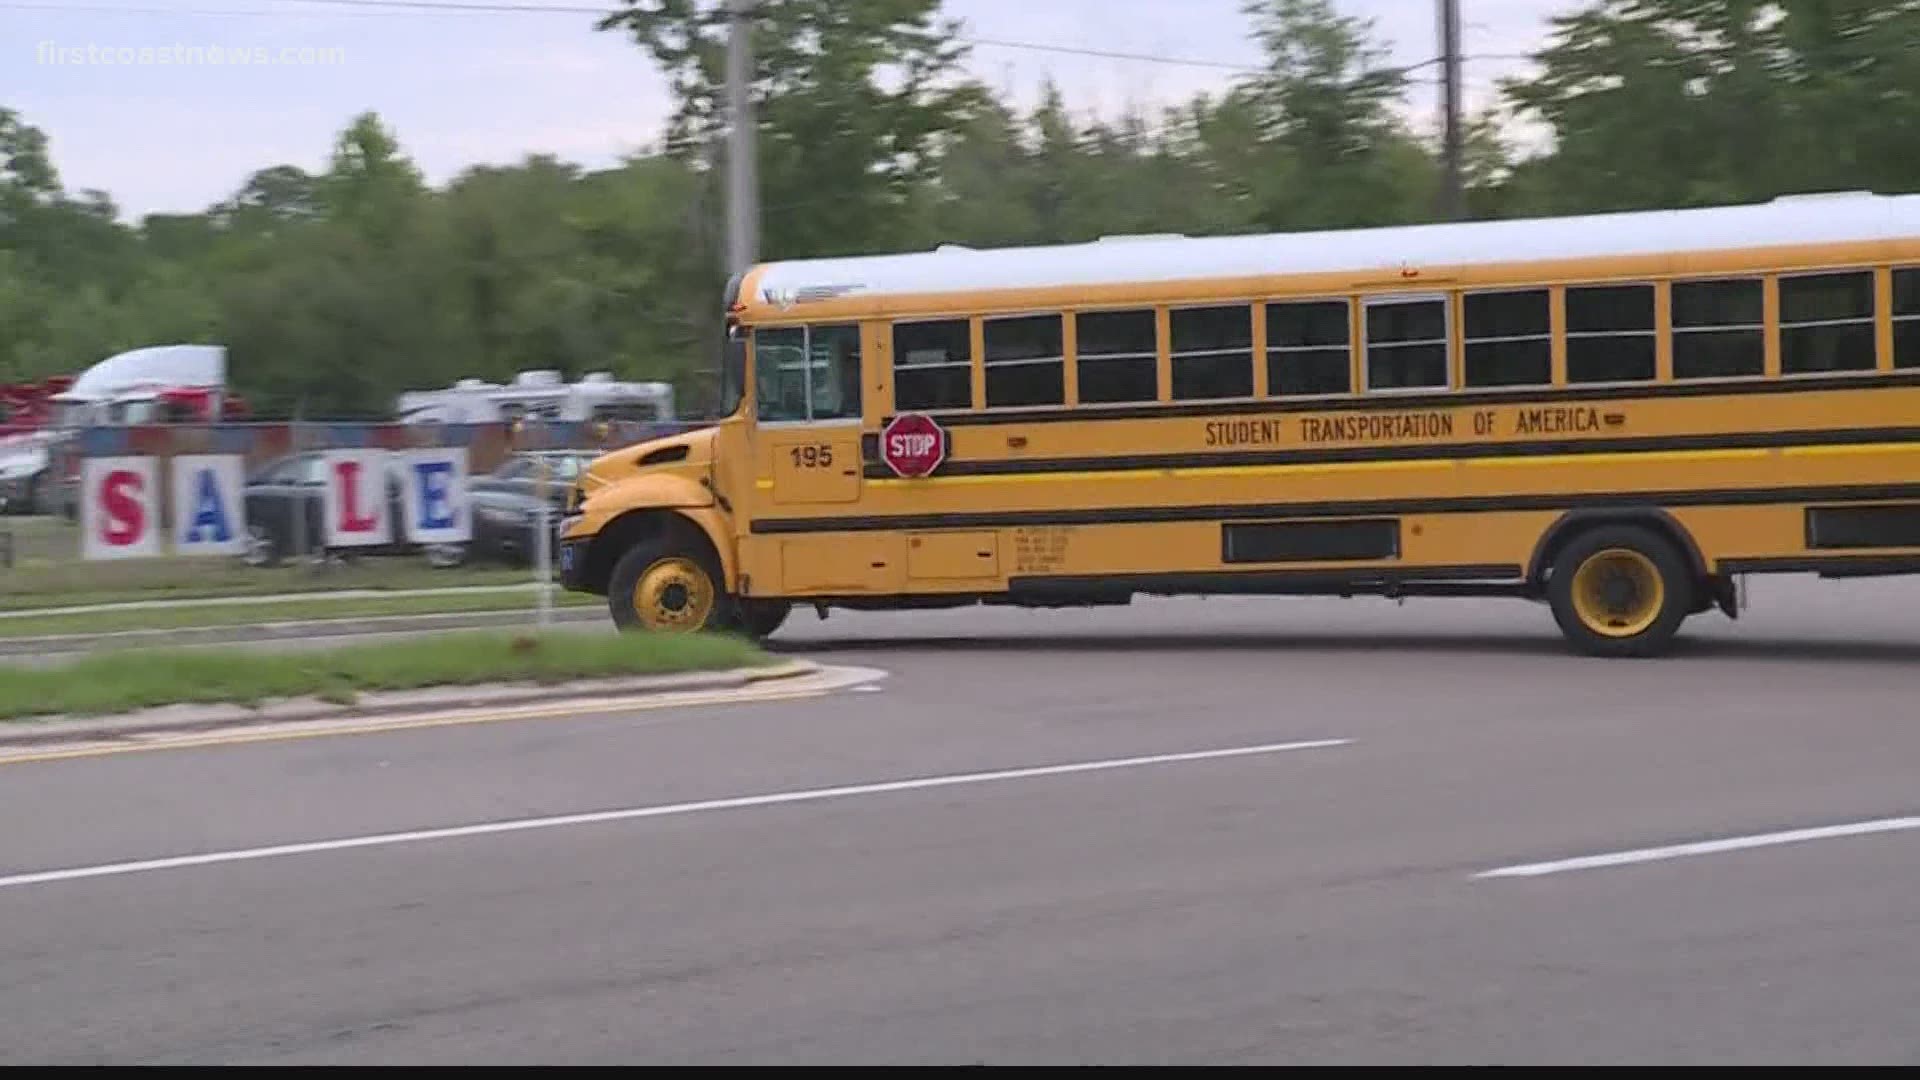 One parent says a bus ride to school in the morning can take three hours. The question is... why?